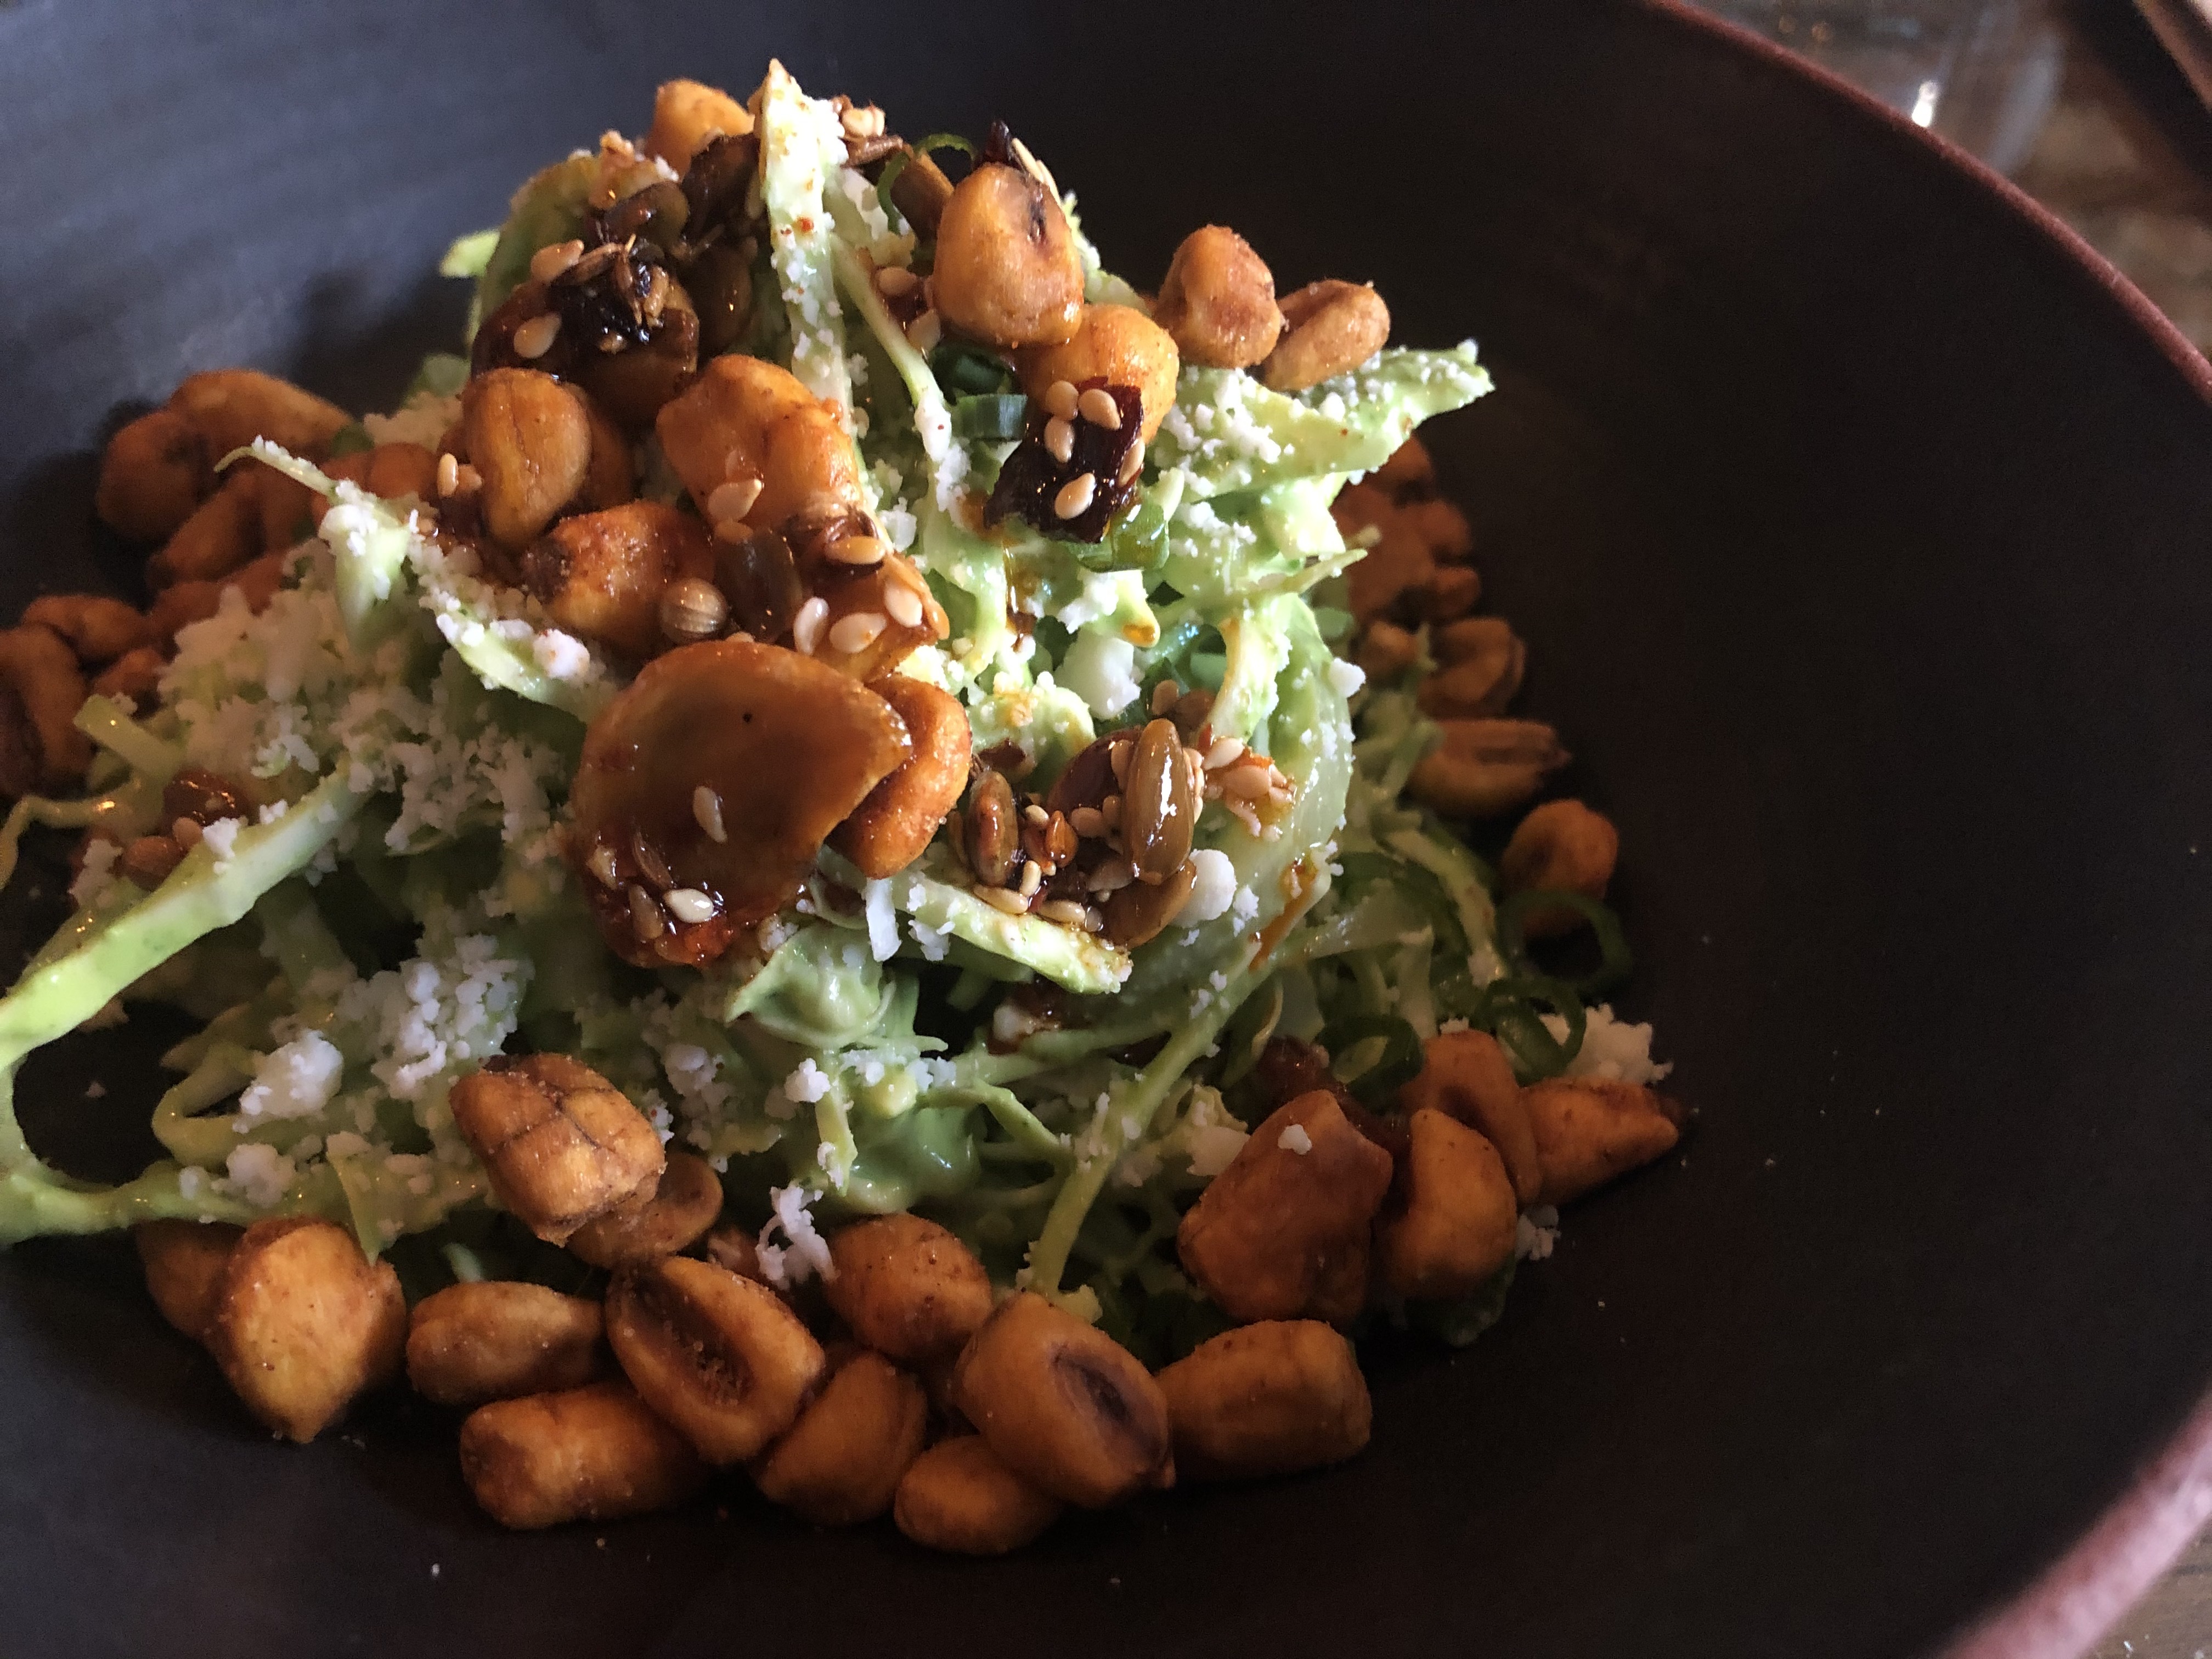 A bowl of cabbage comes topped with corn nuts and shaved cheese